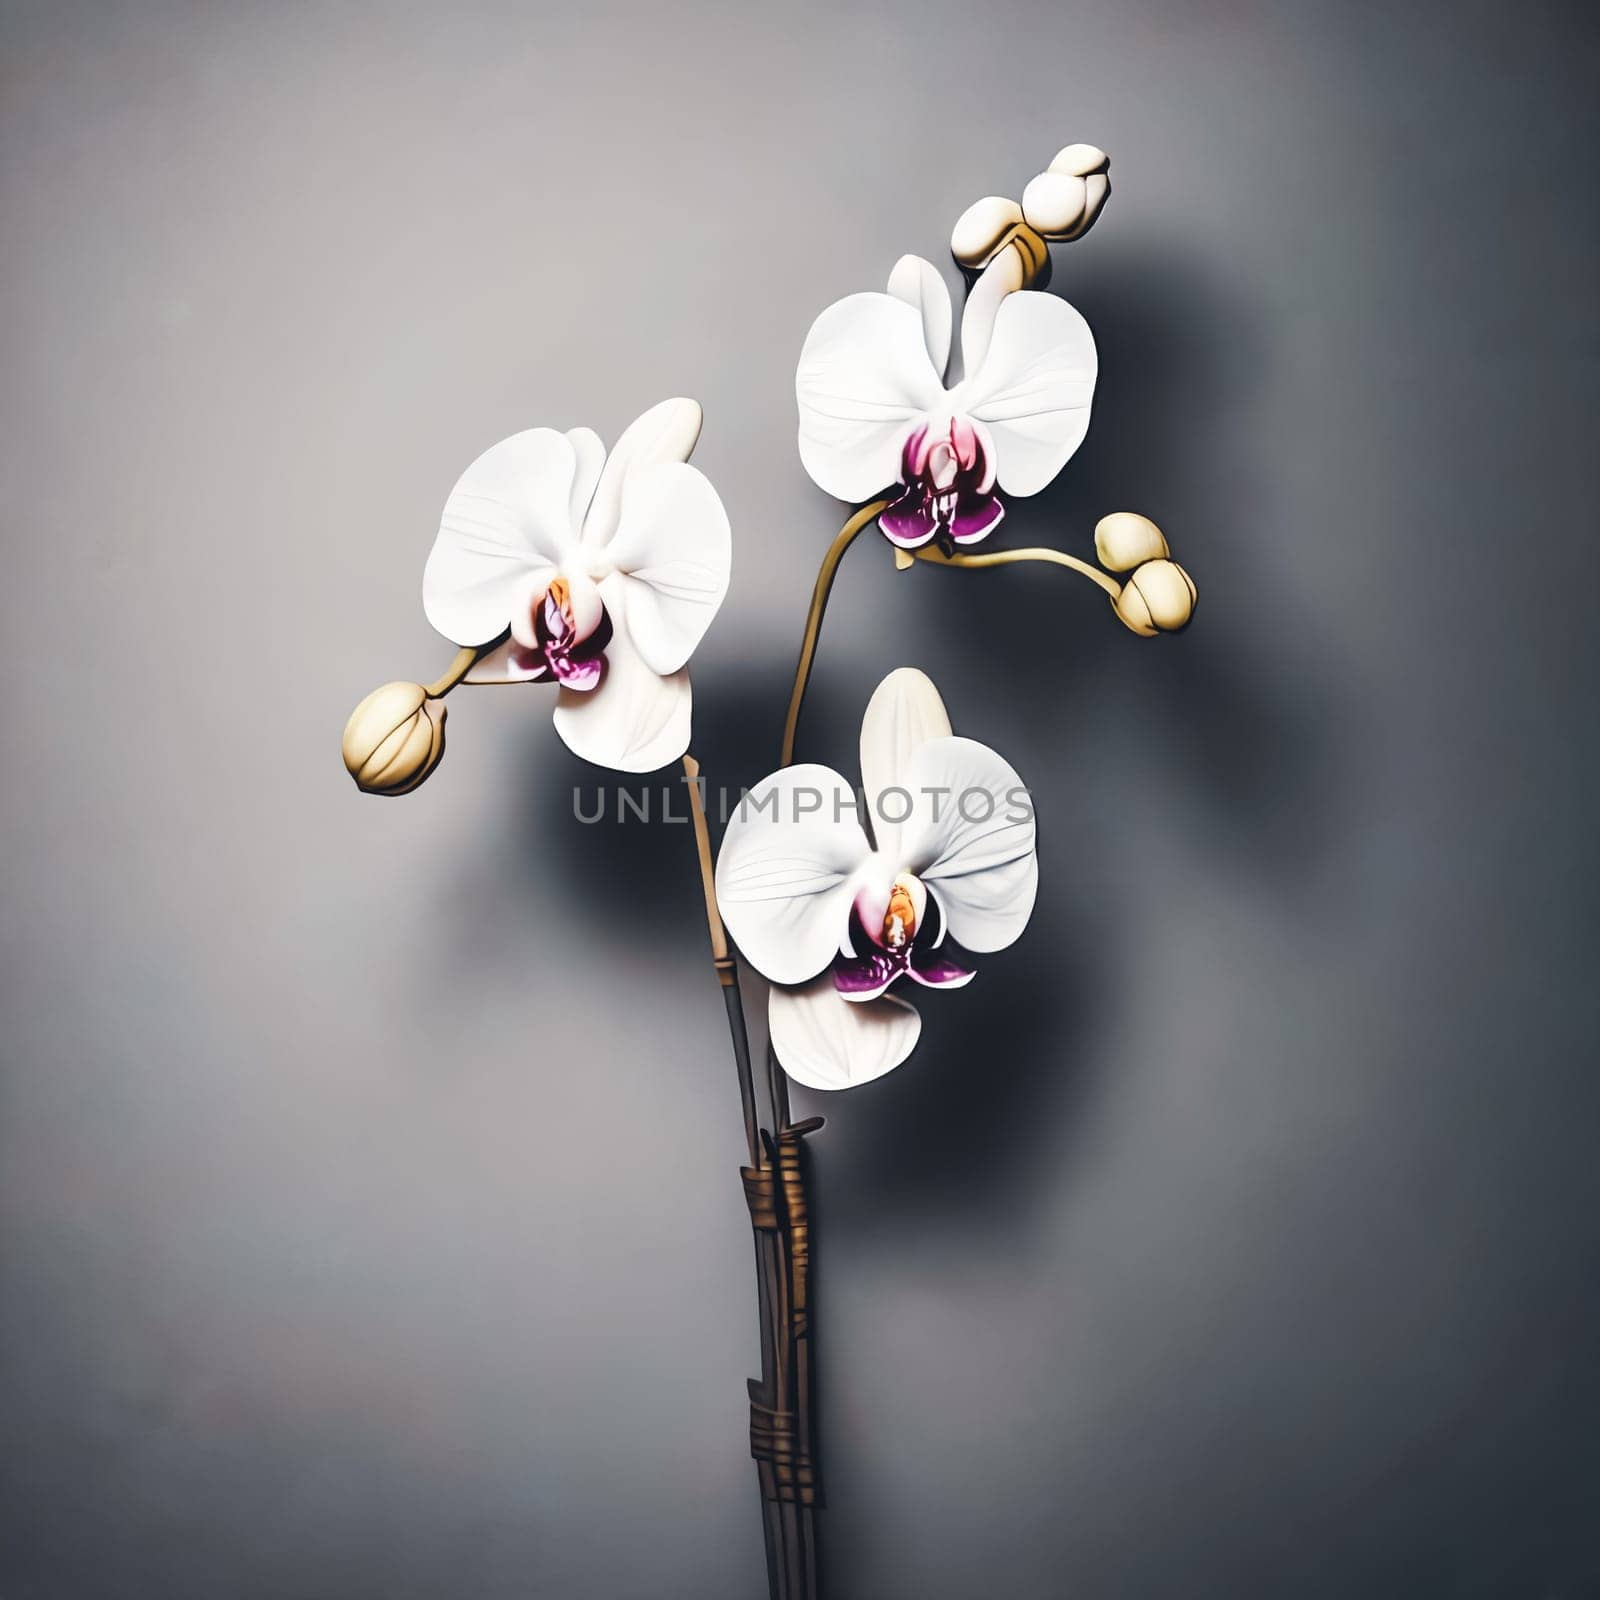 Minimalist background featuring a single elegant orchid against a soft, neutral backdrop.